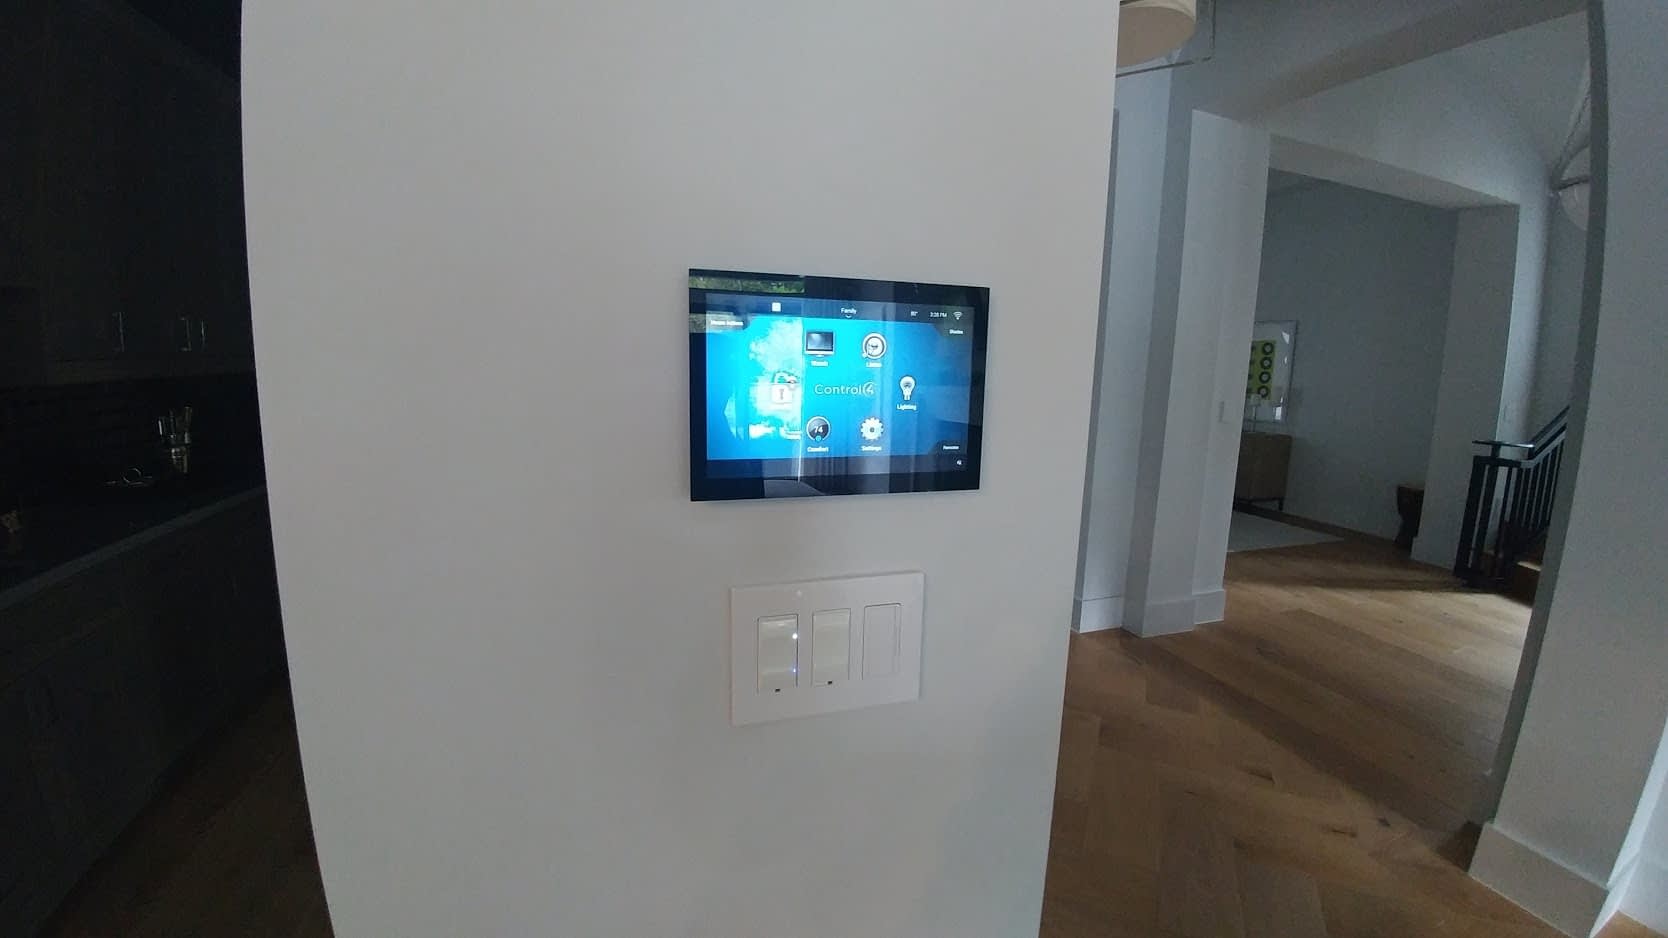 View Our Work Home Automation & Theater Experts